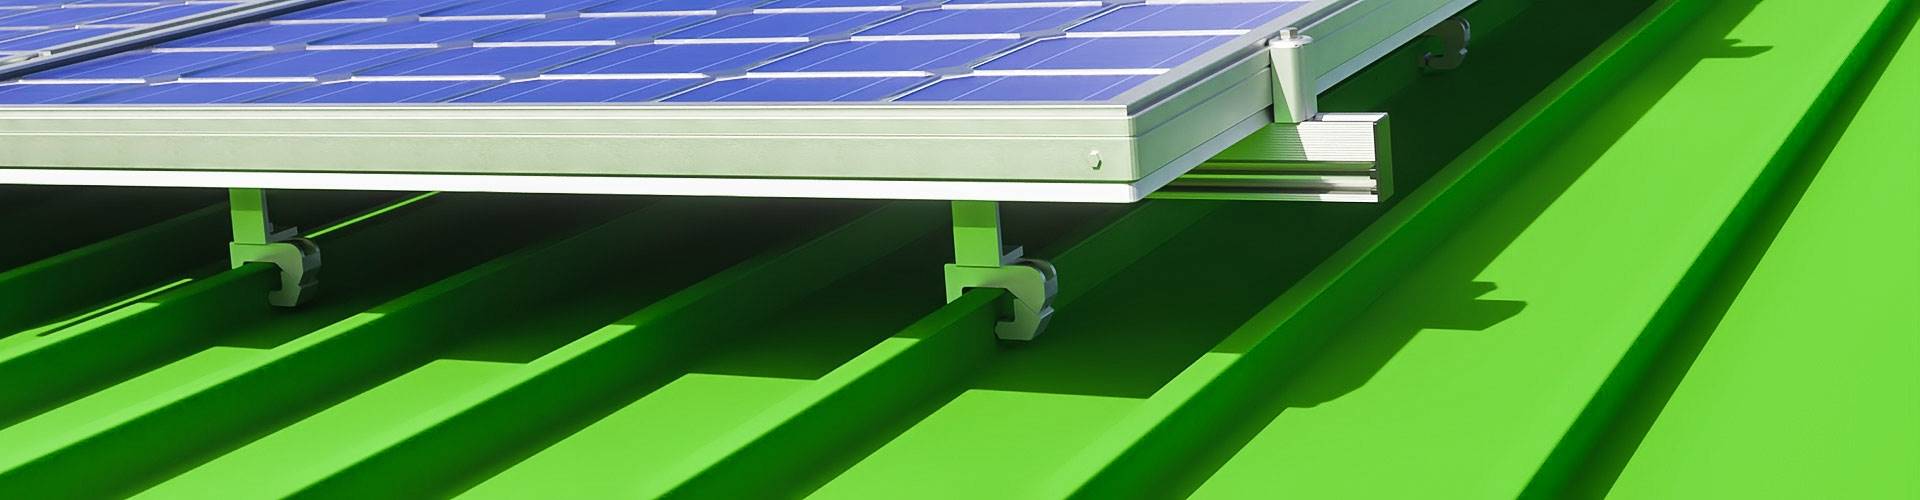 Solar Panel Mounting Systems by Aceclamp®